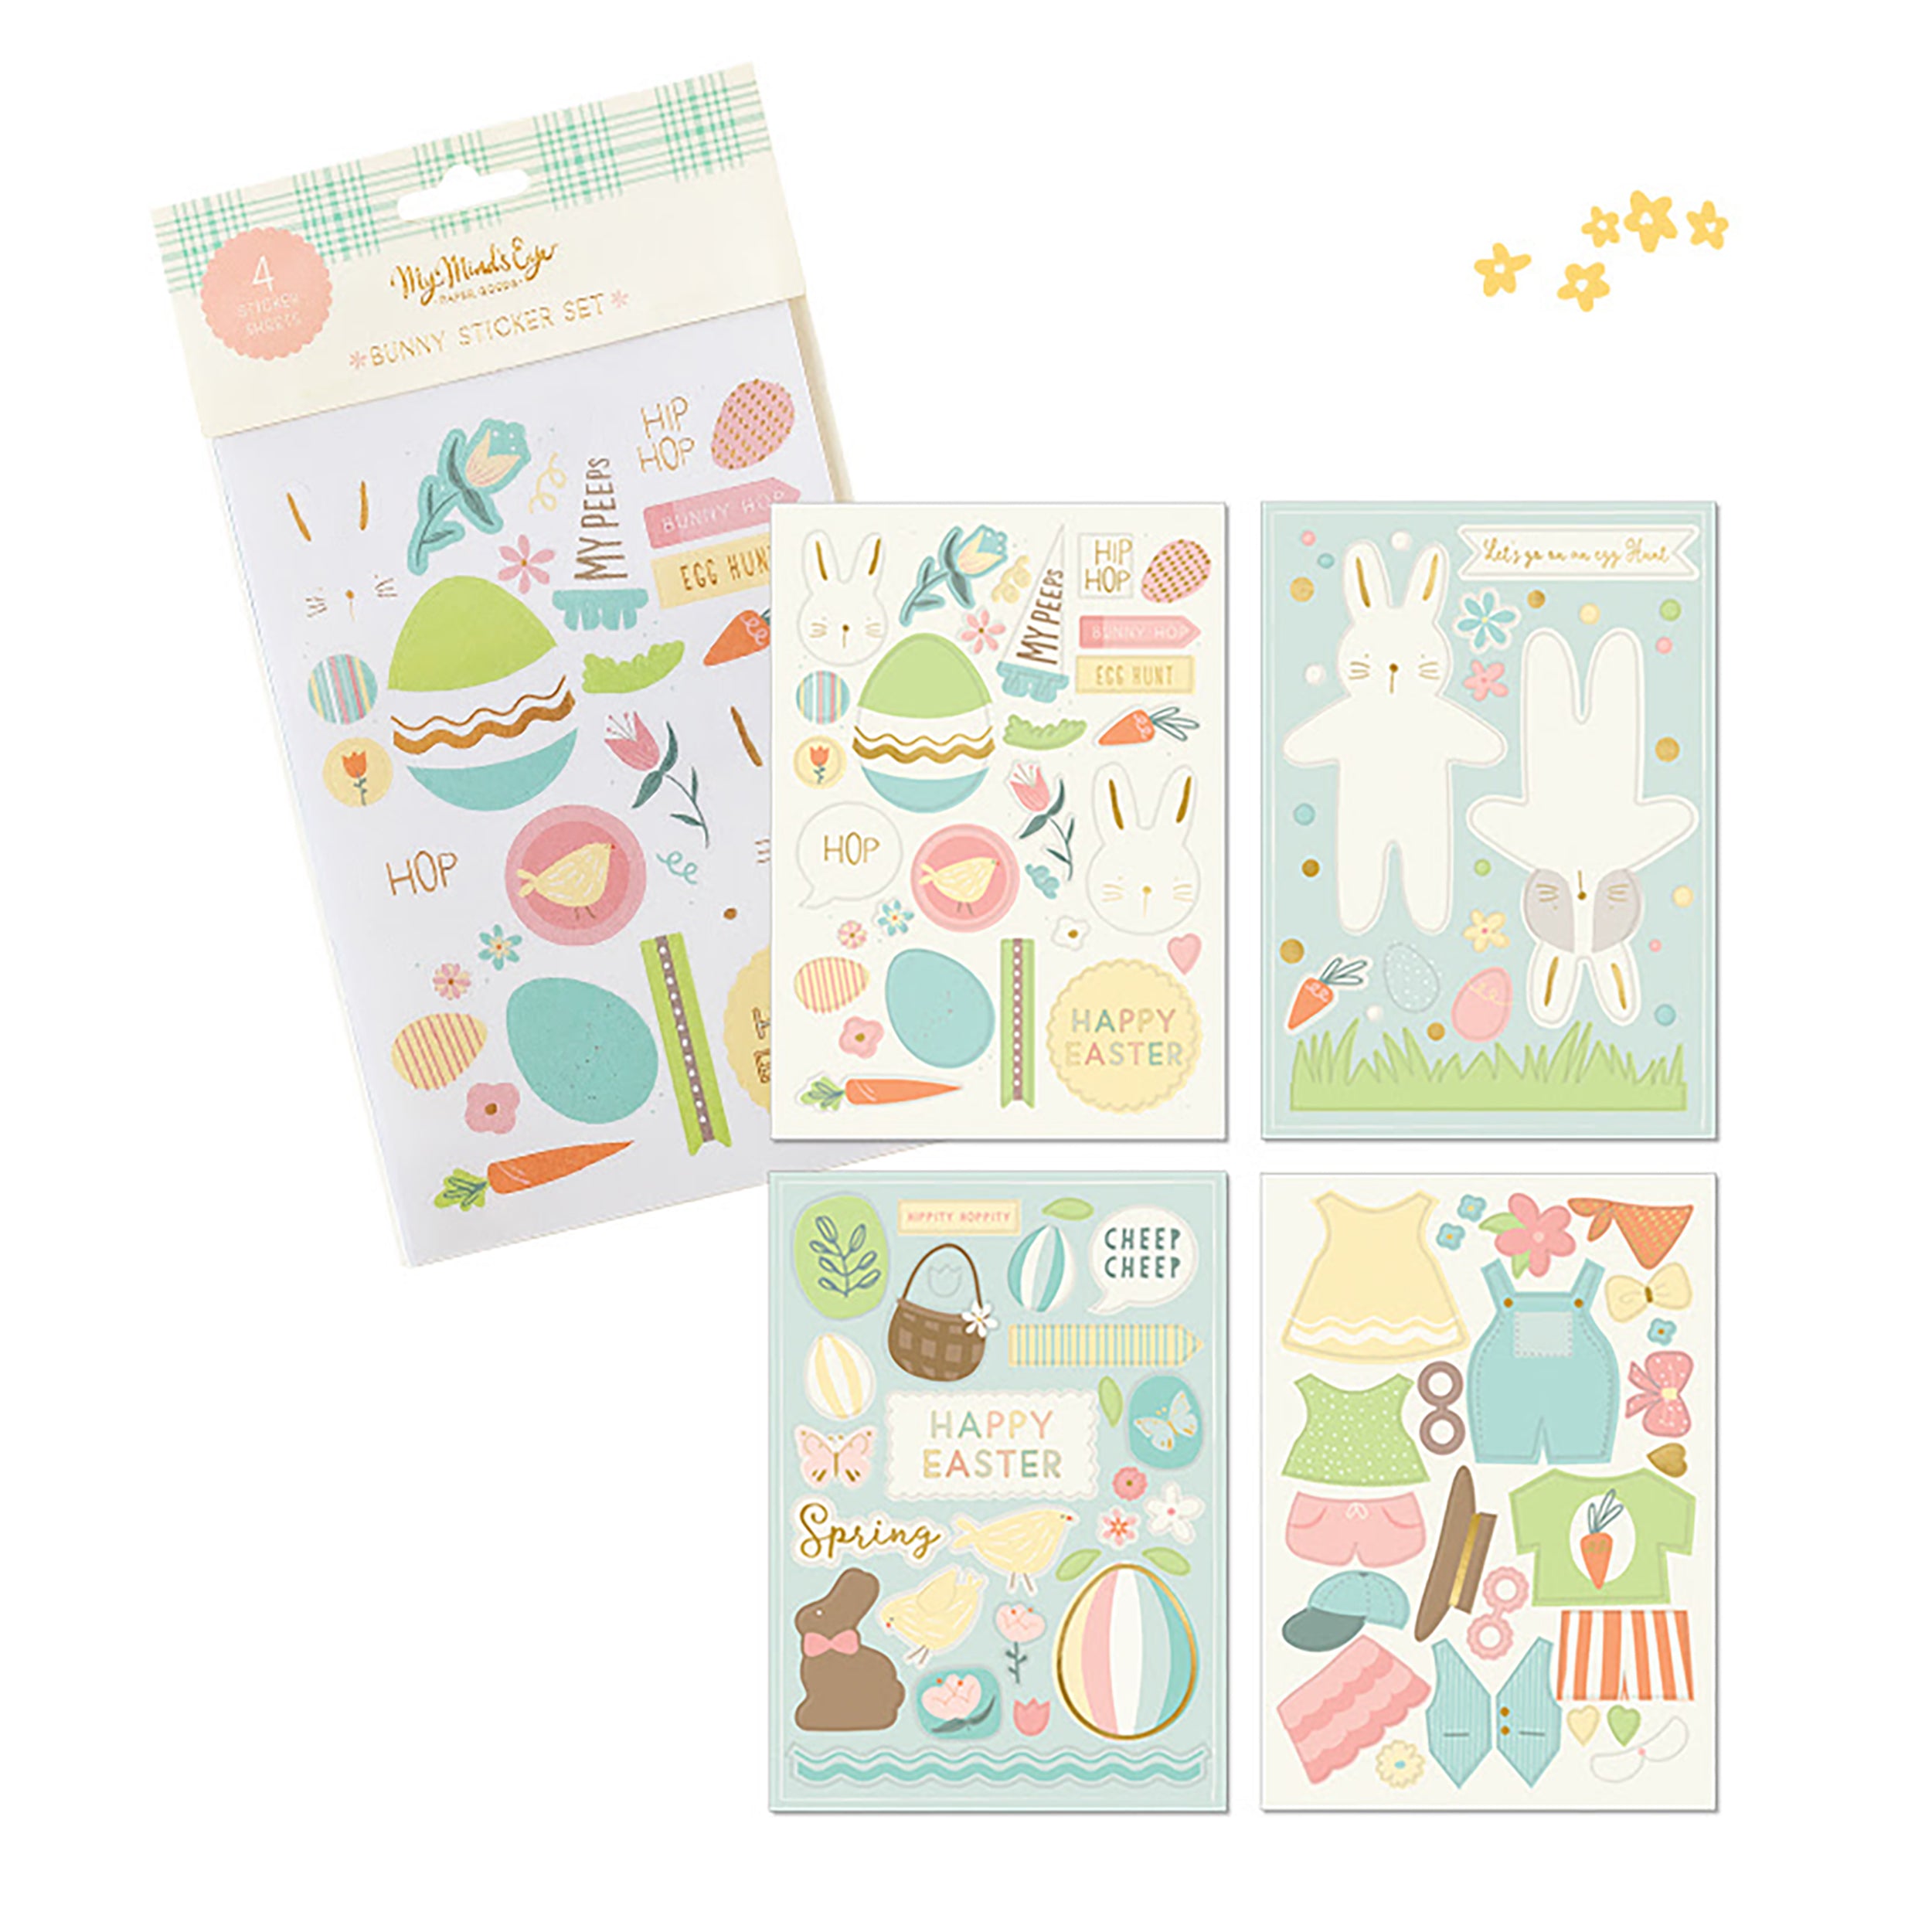 Easter Stickers